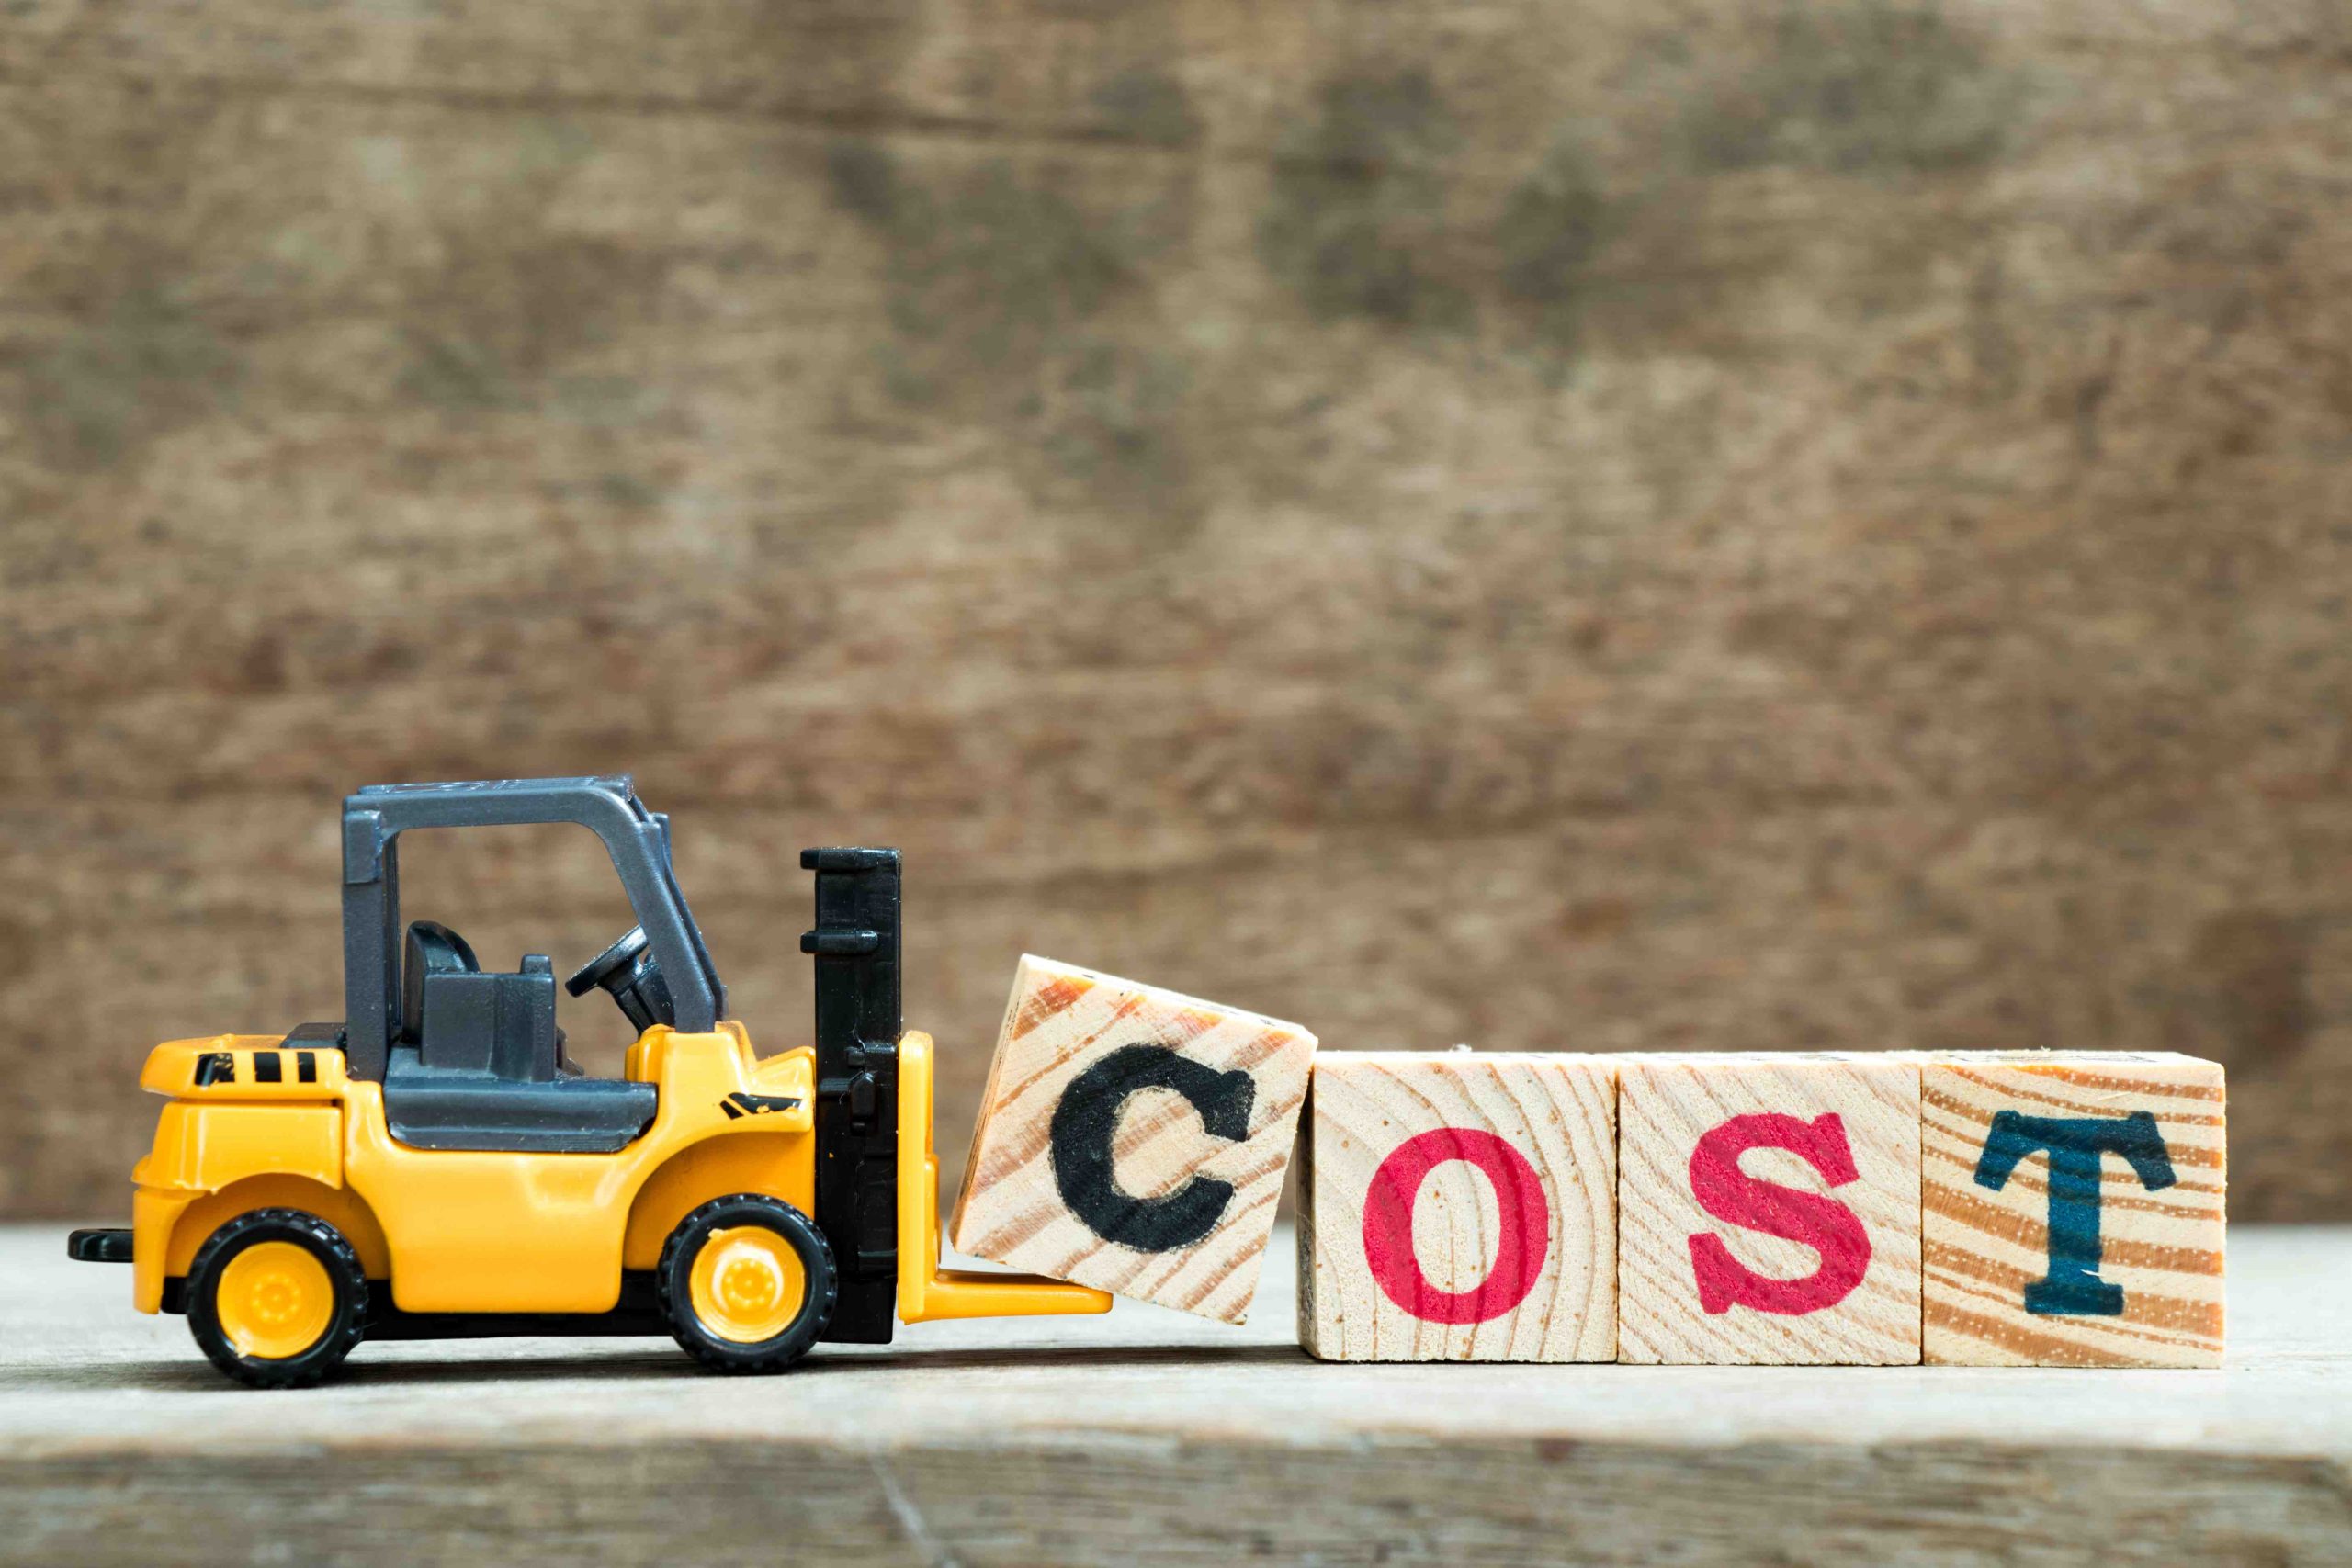 How to Calculate Order Fulfillment Costs